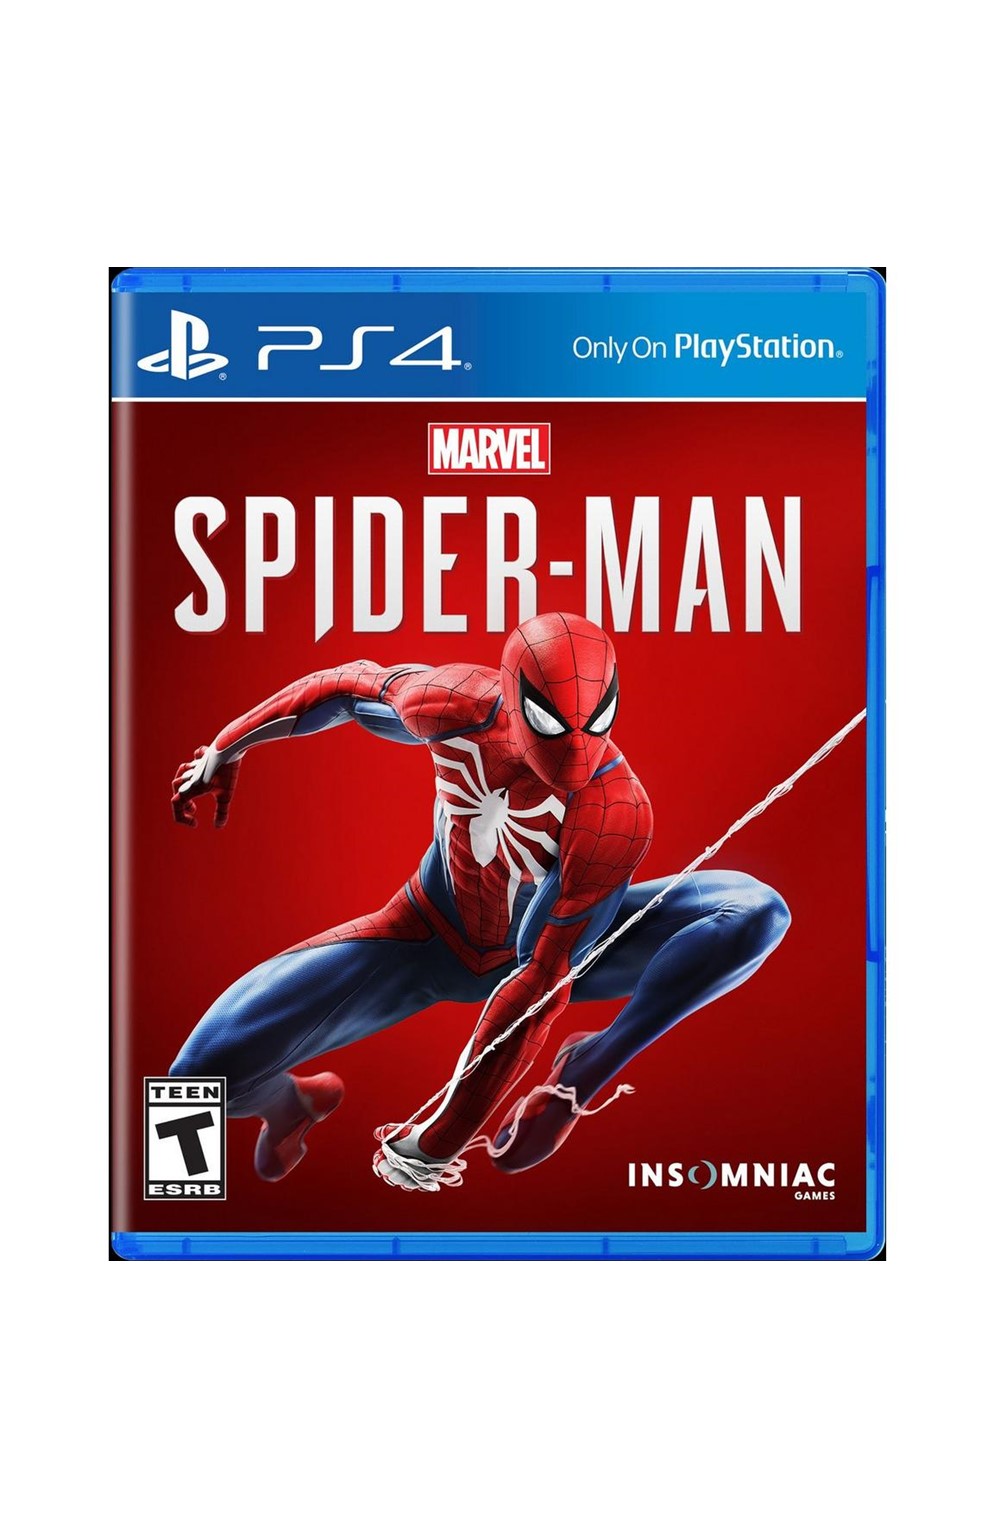 Spider-Man: Web of Shadows (PS3) - Pre-Owned 